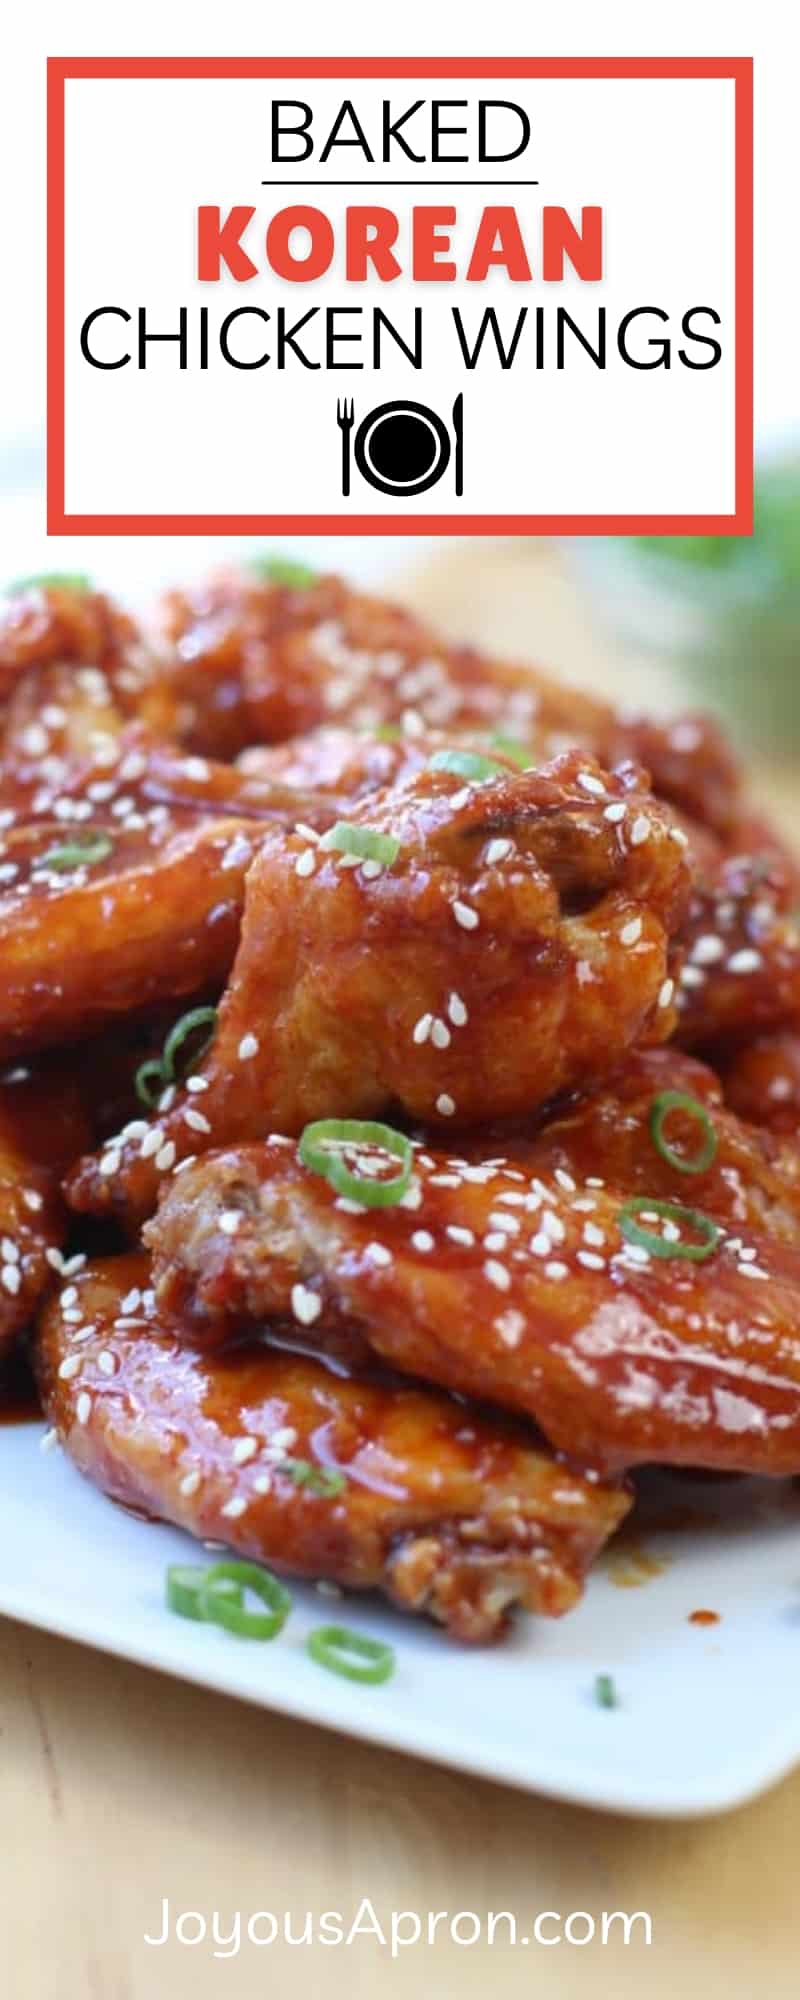 Baked Korean Chicken Wings - An Asian inspired baked wings recipe, perfect as appetizer and dinner! A fun party food for game day as well! Crispy chicken coated with spicy, flavorful gochujang based sauce. via @joyousapron